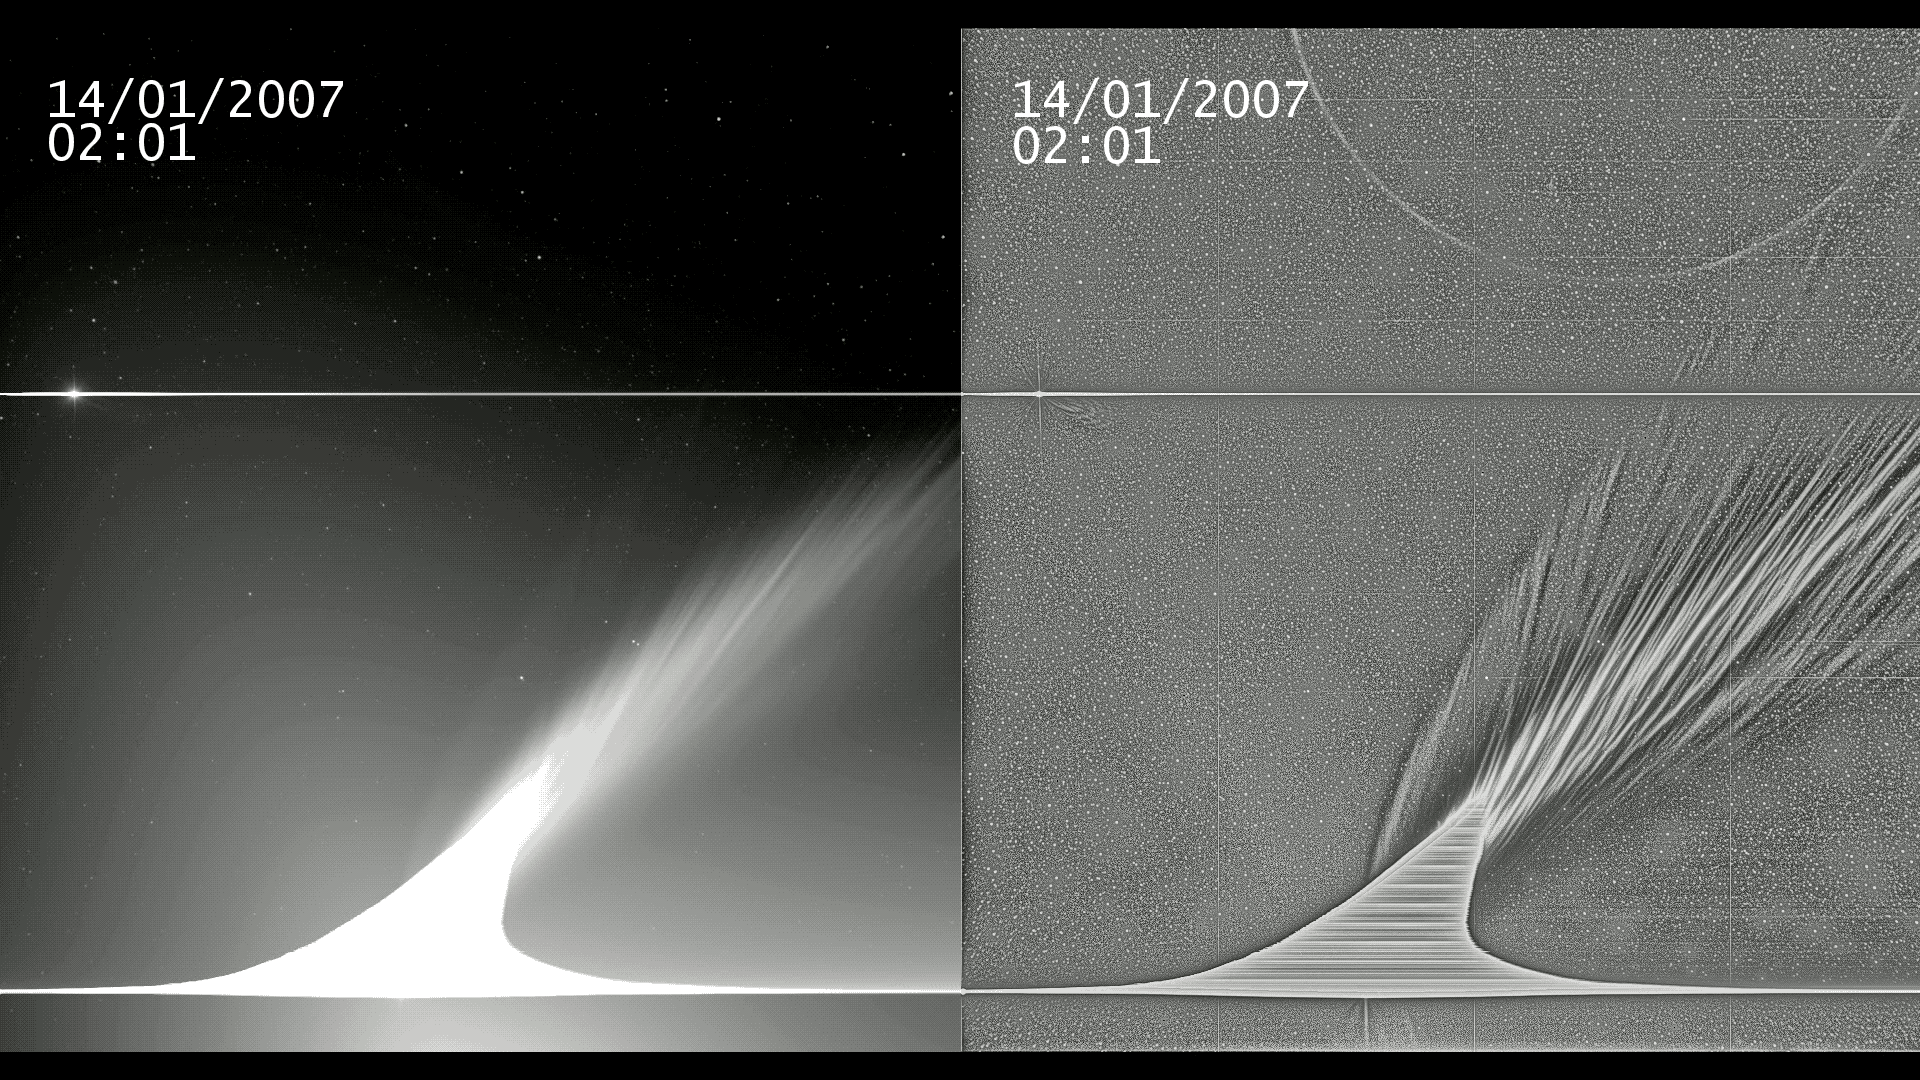 Spacecraft observations of the comet McNaught from the SOHO and STEREO missions. CREDIT: NASA's Goddard Space Flight Center